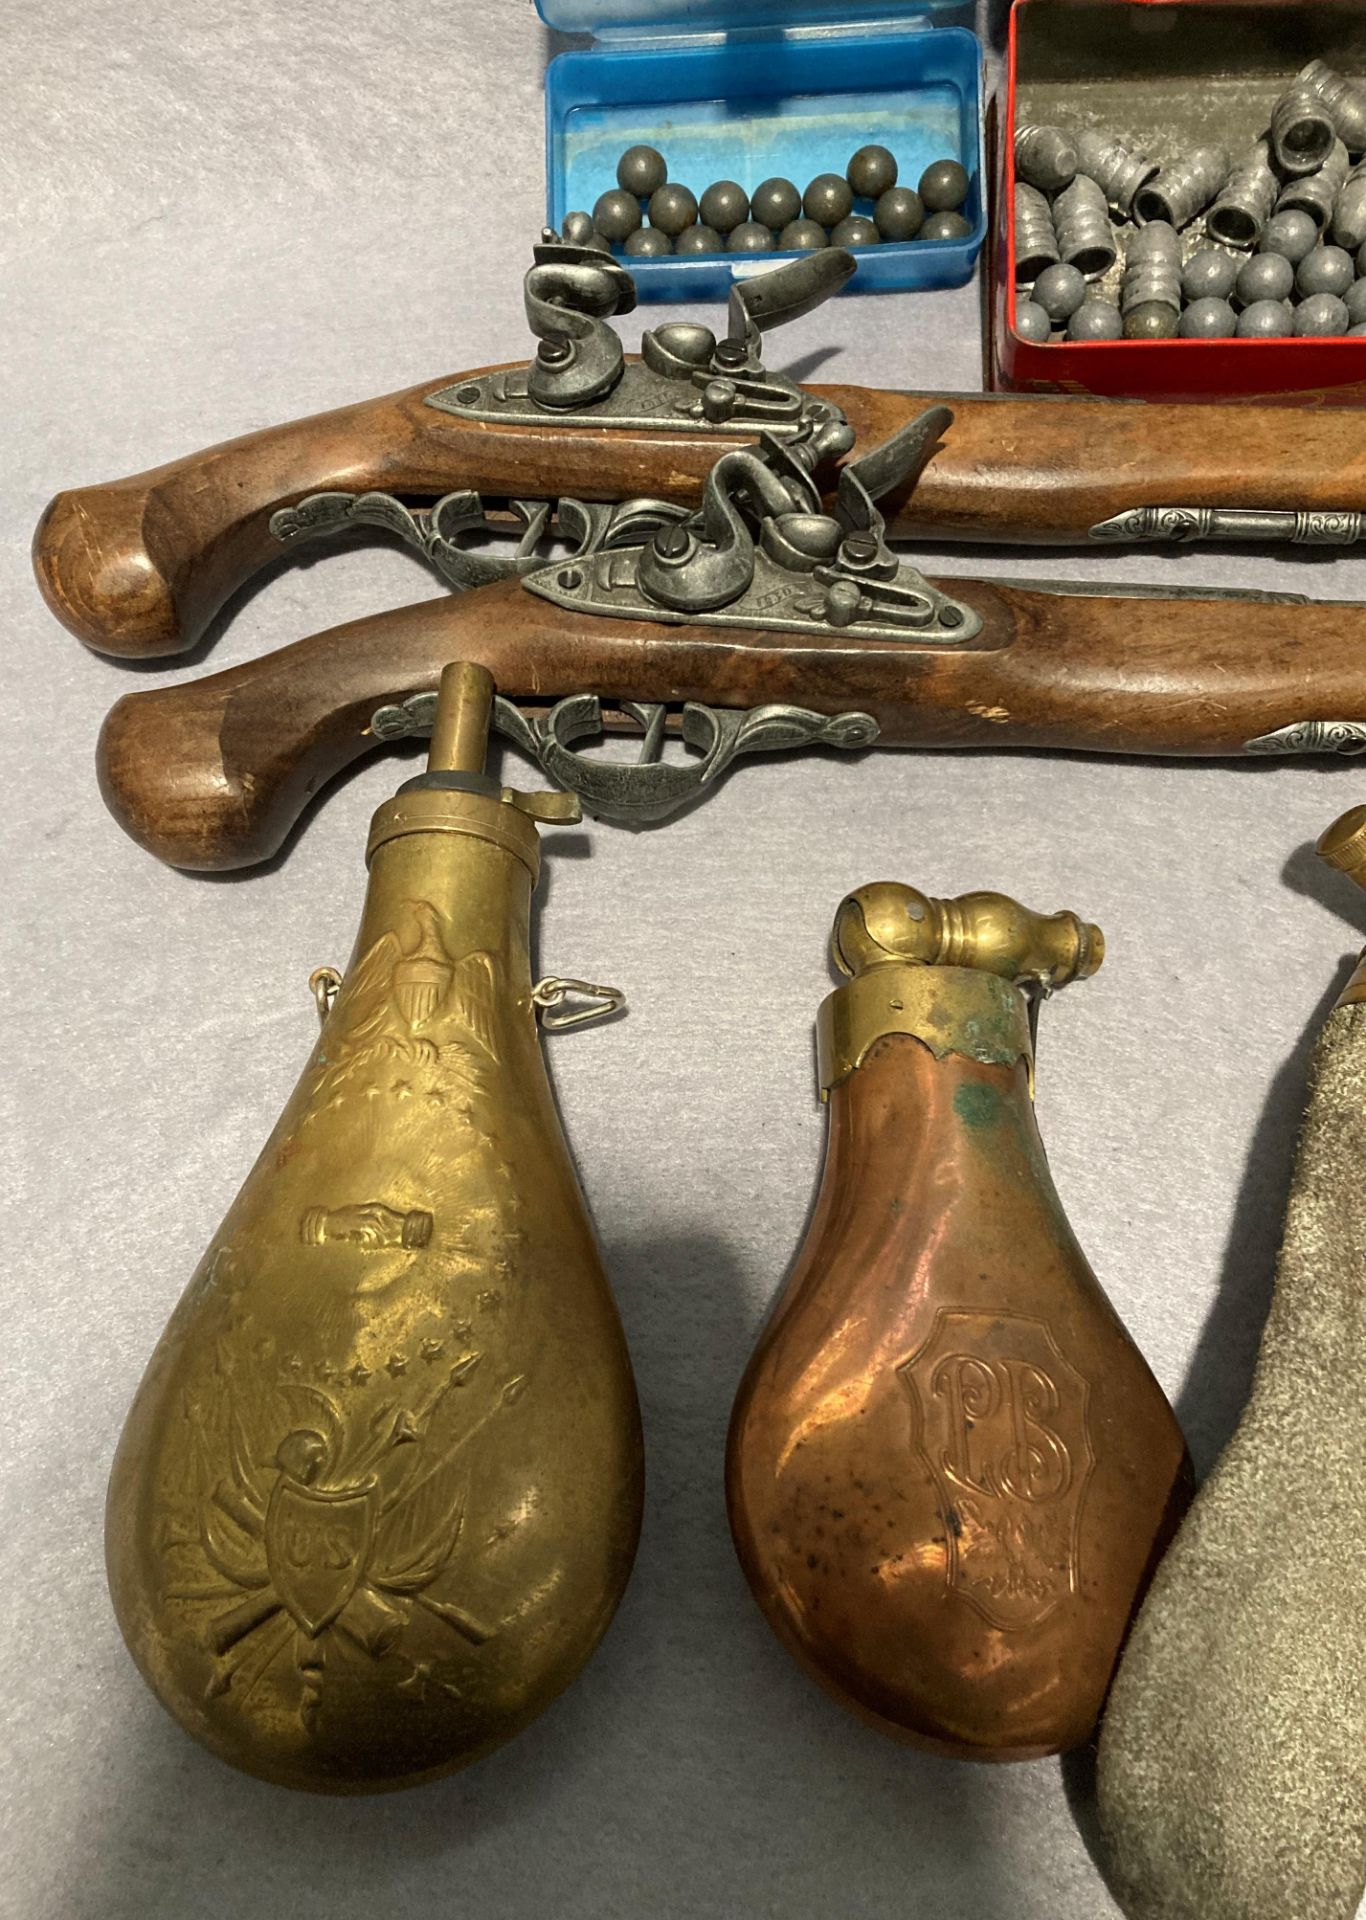 Contents to tray - two 1830 replica flintlock pistols, four assorted powder flasks including horn, - Image 2 of 3